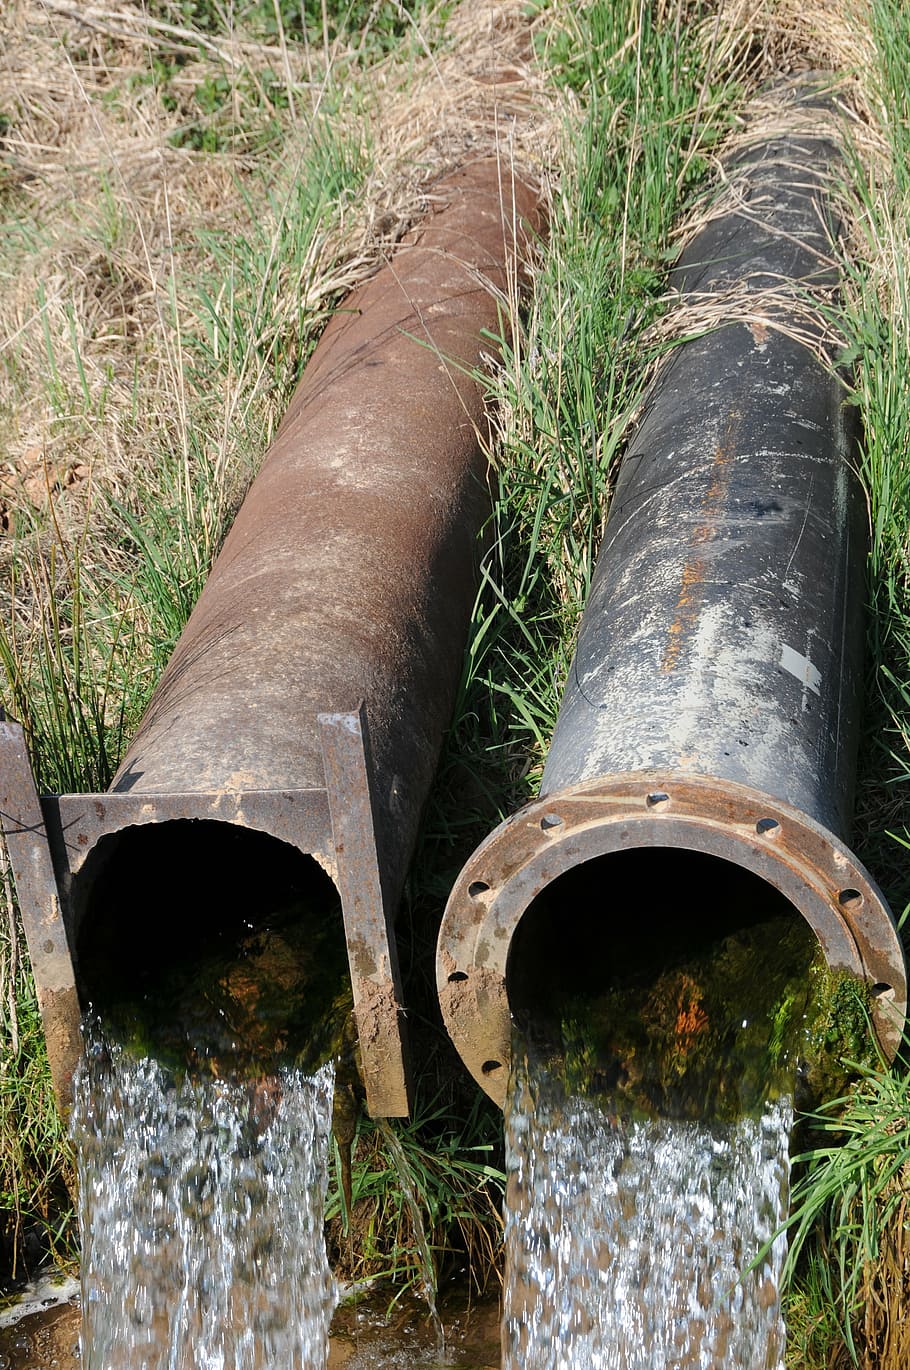 pipes, water, stainless, drainage, fluent, metal, drain, pipe - tube, nature, plant